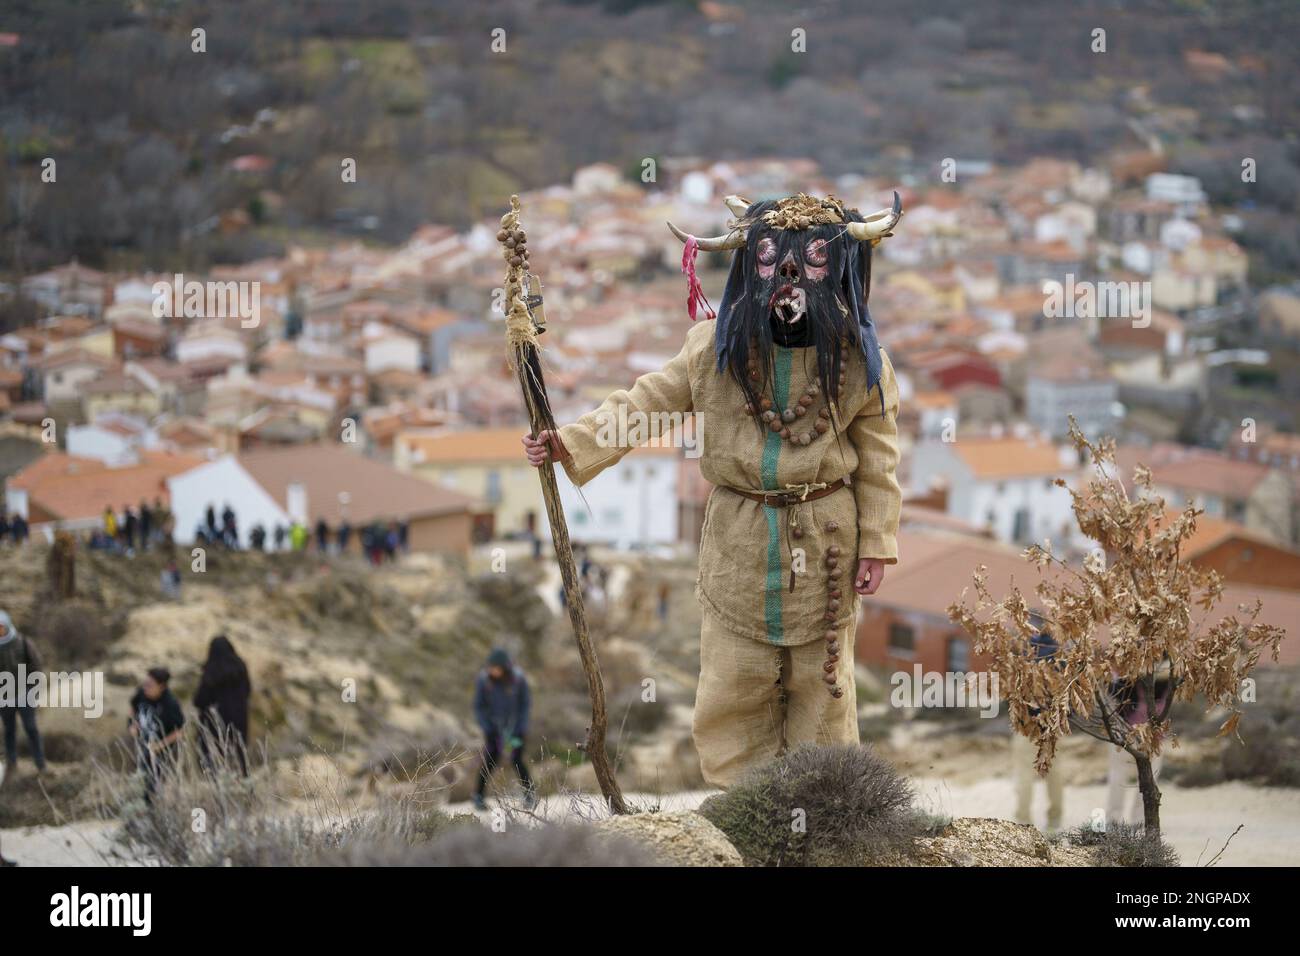 Navalacruz, Spain. 18th Feb, 2023. A carnival reveller dressed as a traditional 'Harramacho' wearing animal horns and other natural decor takes part in a carnival festival in the village of Navalacruz, Spain, on Saturday, February 18, 2023. The 'Herramacho' figures, whose costumes are made from natural materials collected from the surrounding environment, were believed to protect family and cattle in pre-Roman rituals. Photo by Paul Hanna/UPI Credit: UPI/Alamy Live News Stock Photo